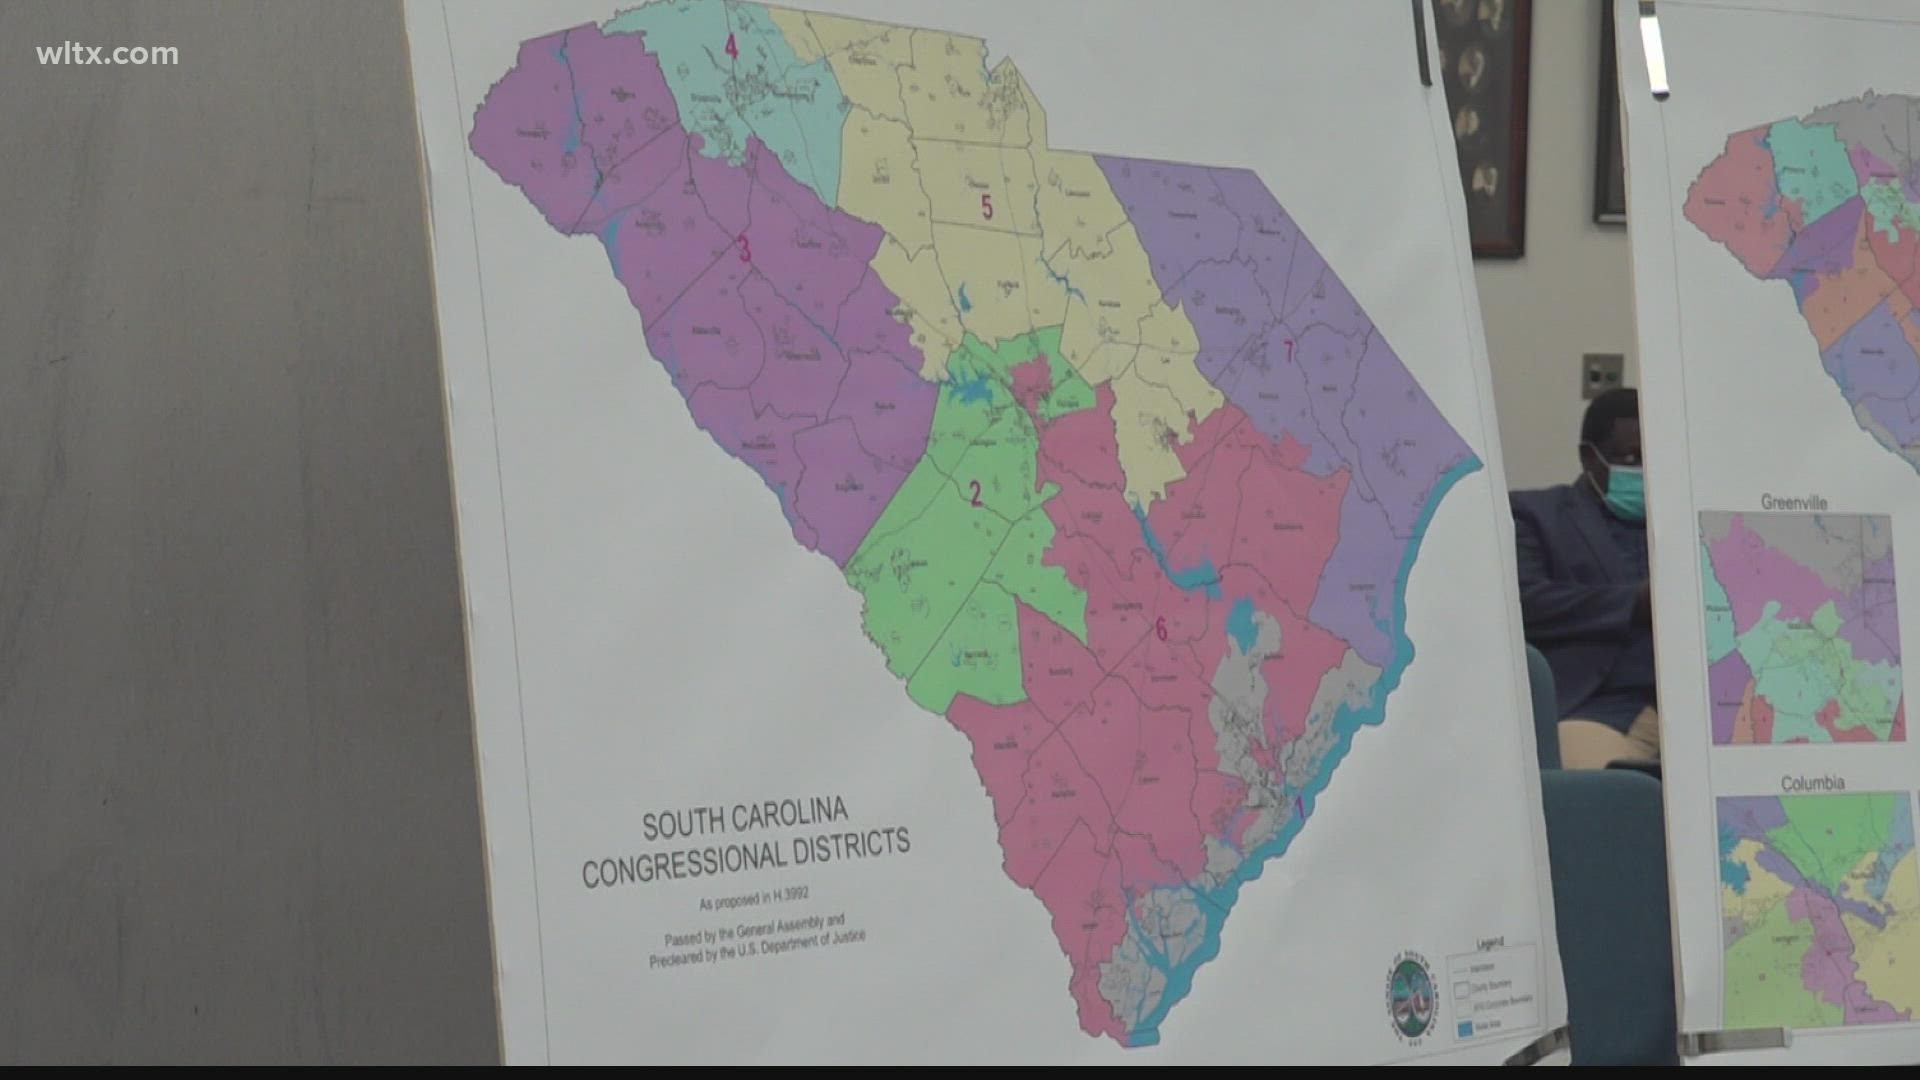 South Carolina state lawmakers tasked with the job of redistricting want to hear from the public regarding where the lines should be drawn.